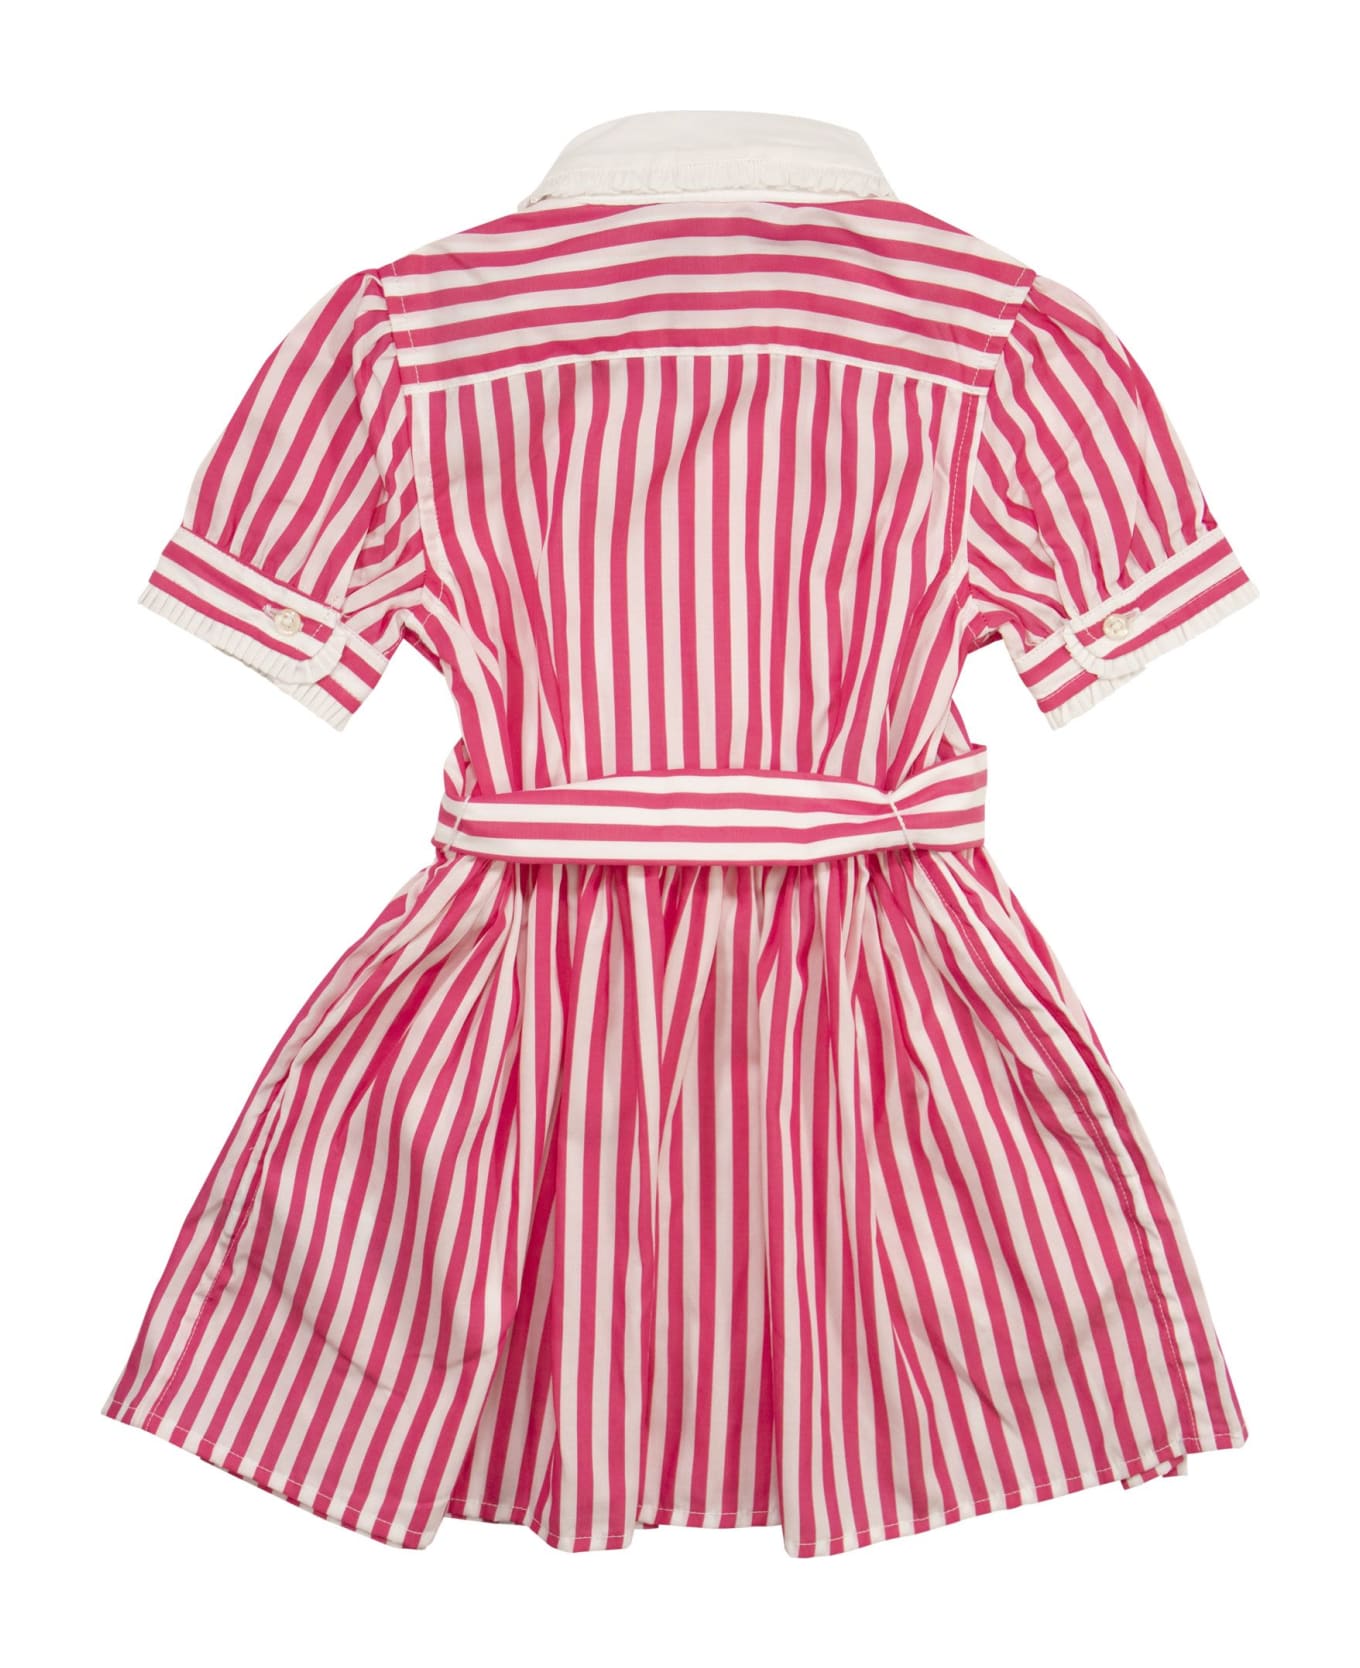 Polo Ralph Lauren Striped Cotton Chemisier With Belt - Pink/white ワンピース＆ドレス